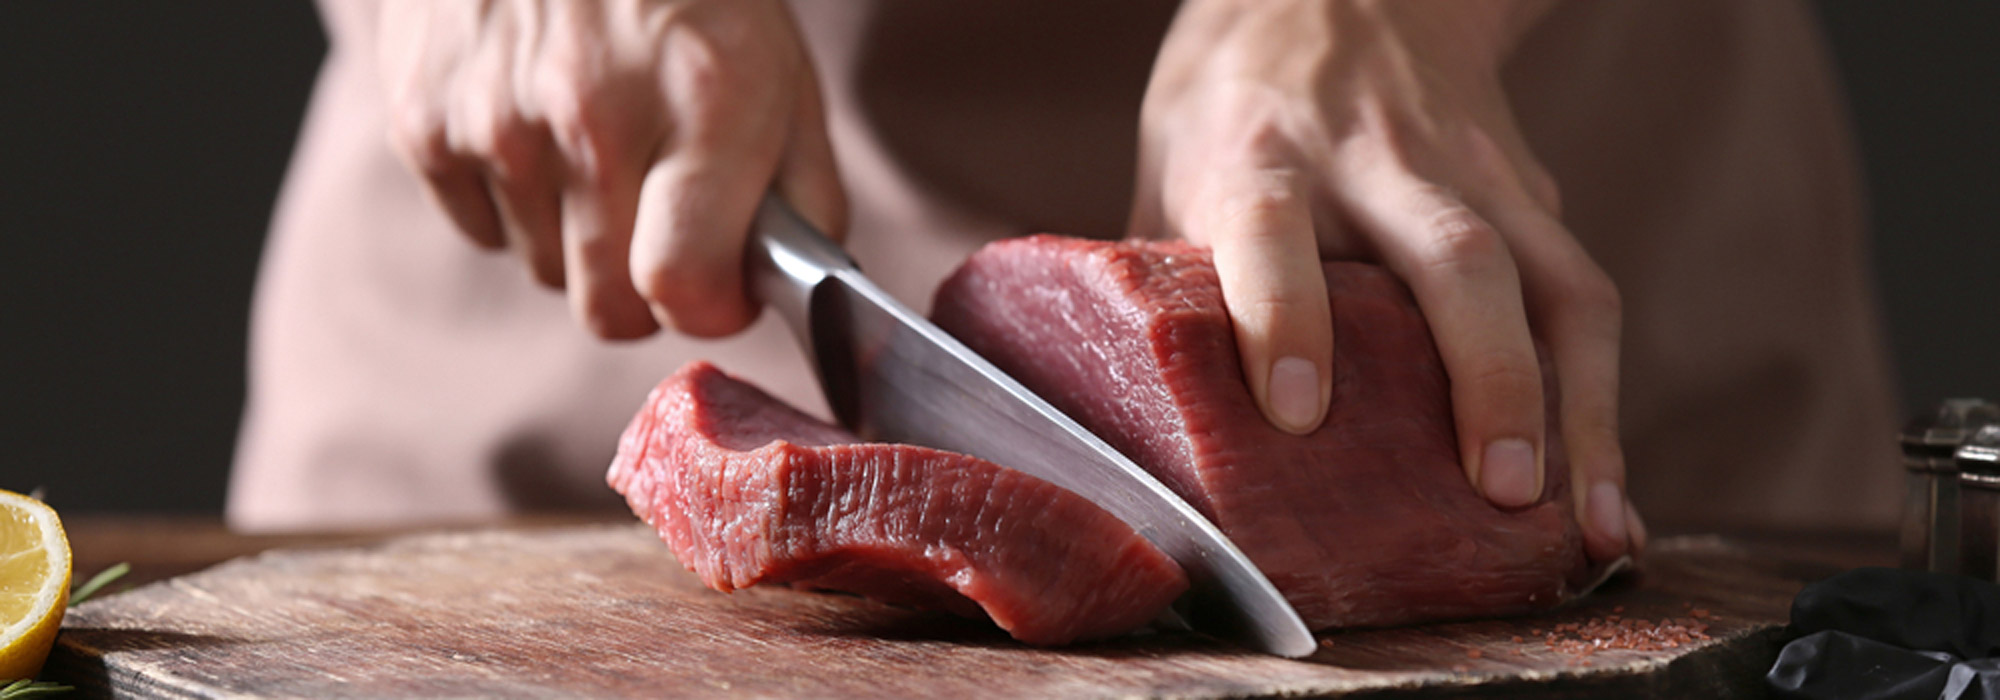 How to be a professional butcher supplies?